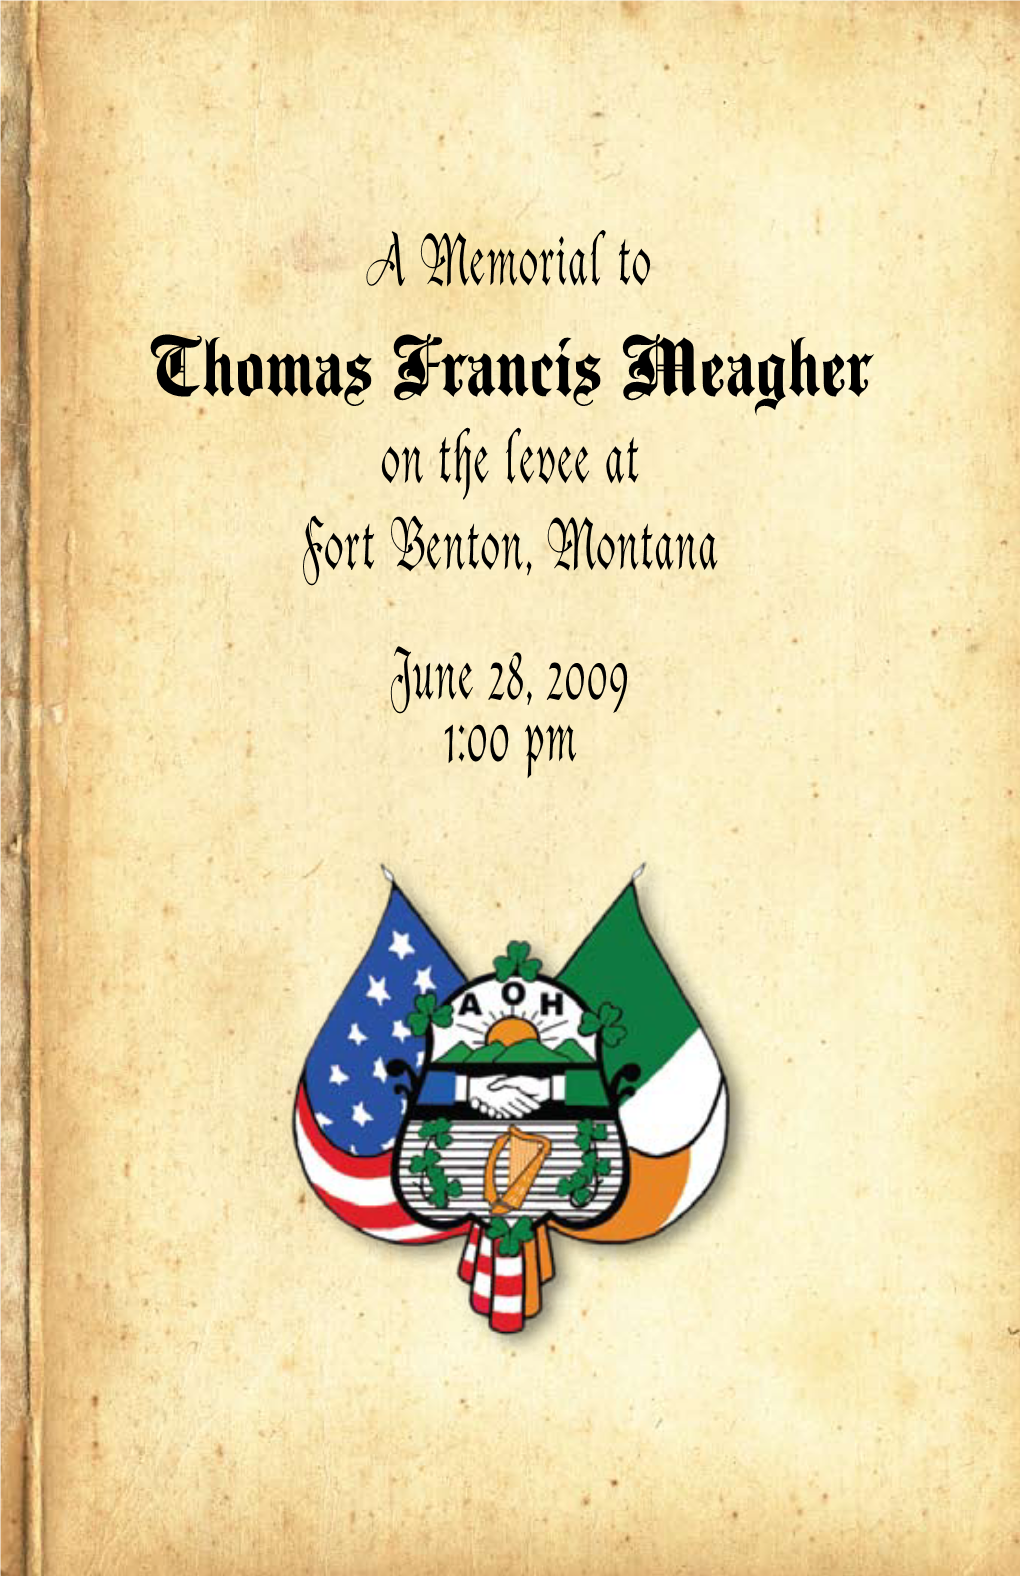 Thomas Francis Meagher Division, Is Now Planning to Establish an Appropriate Memorial to Their Namesake